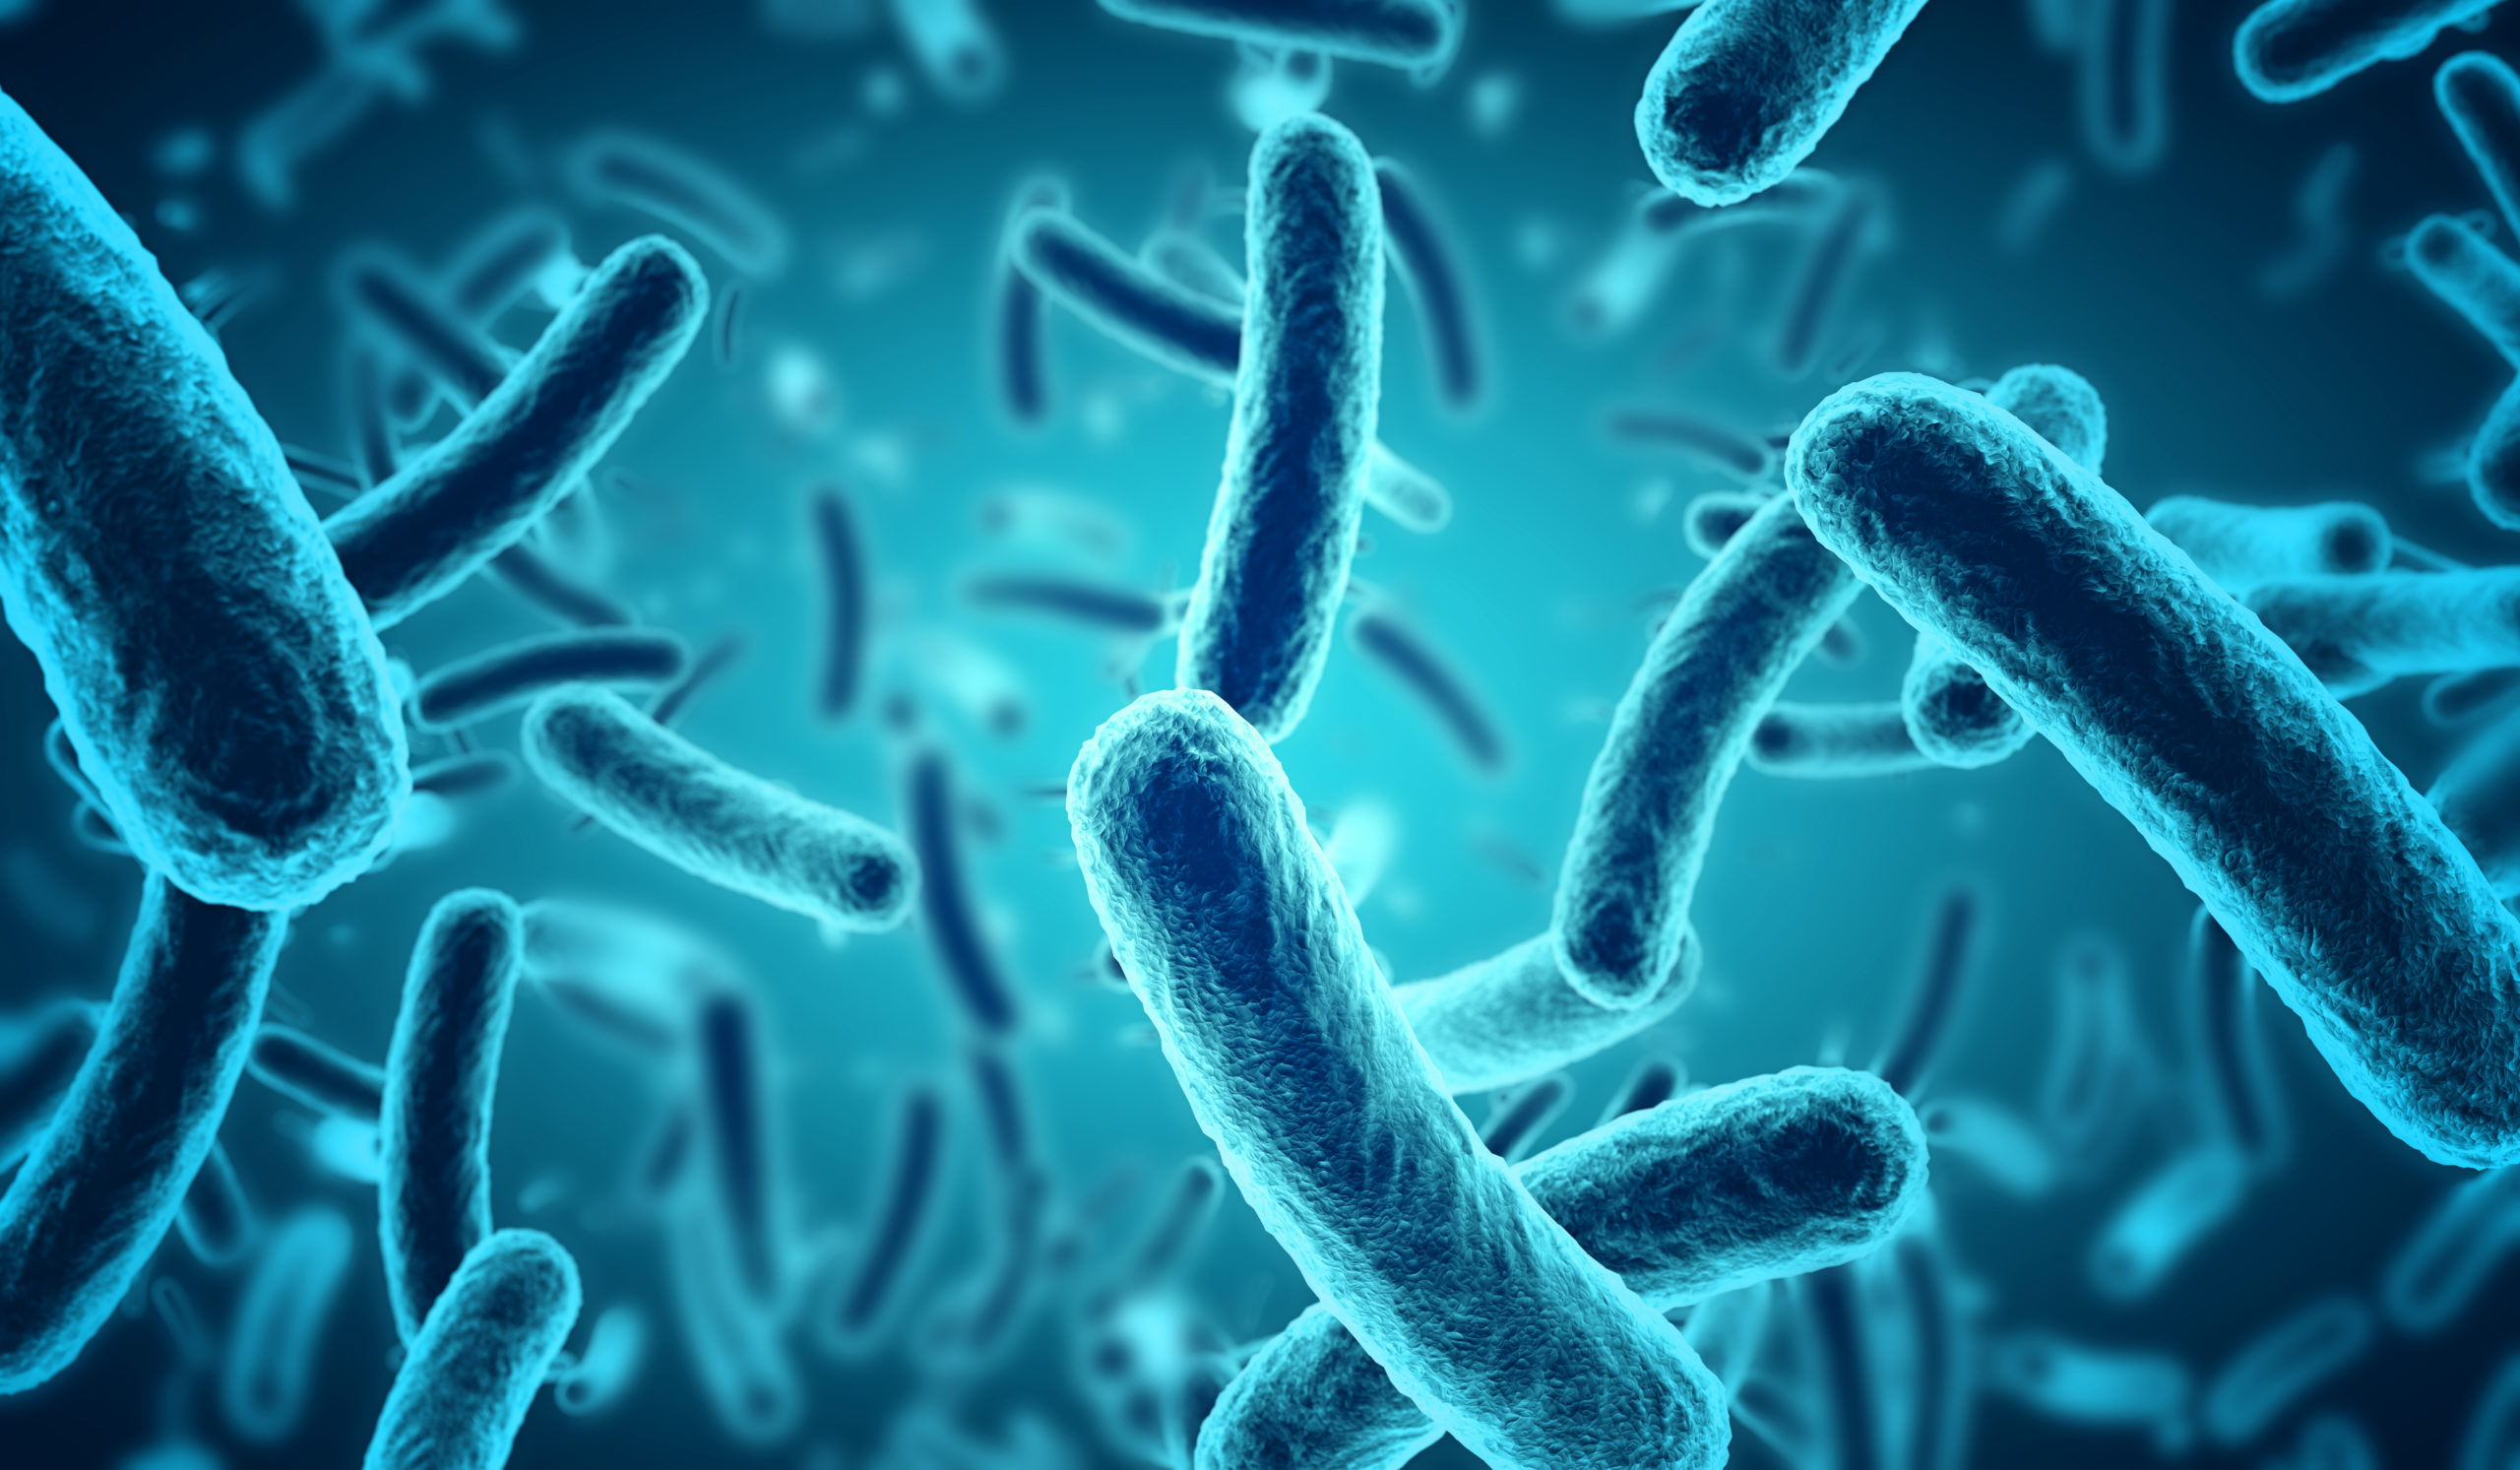 TRACKING AND TACKLING THE NONTUBERCULOUS MYCOBACTERIA OUTBREAK